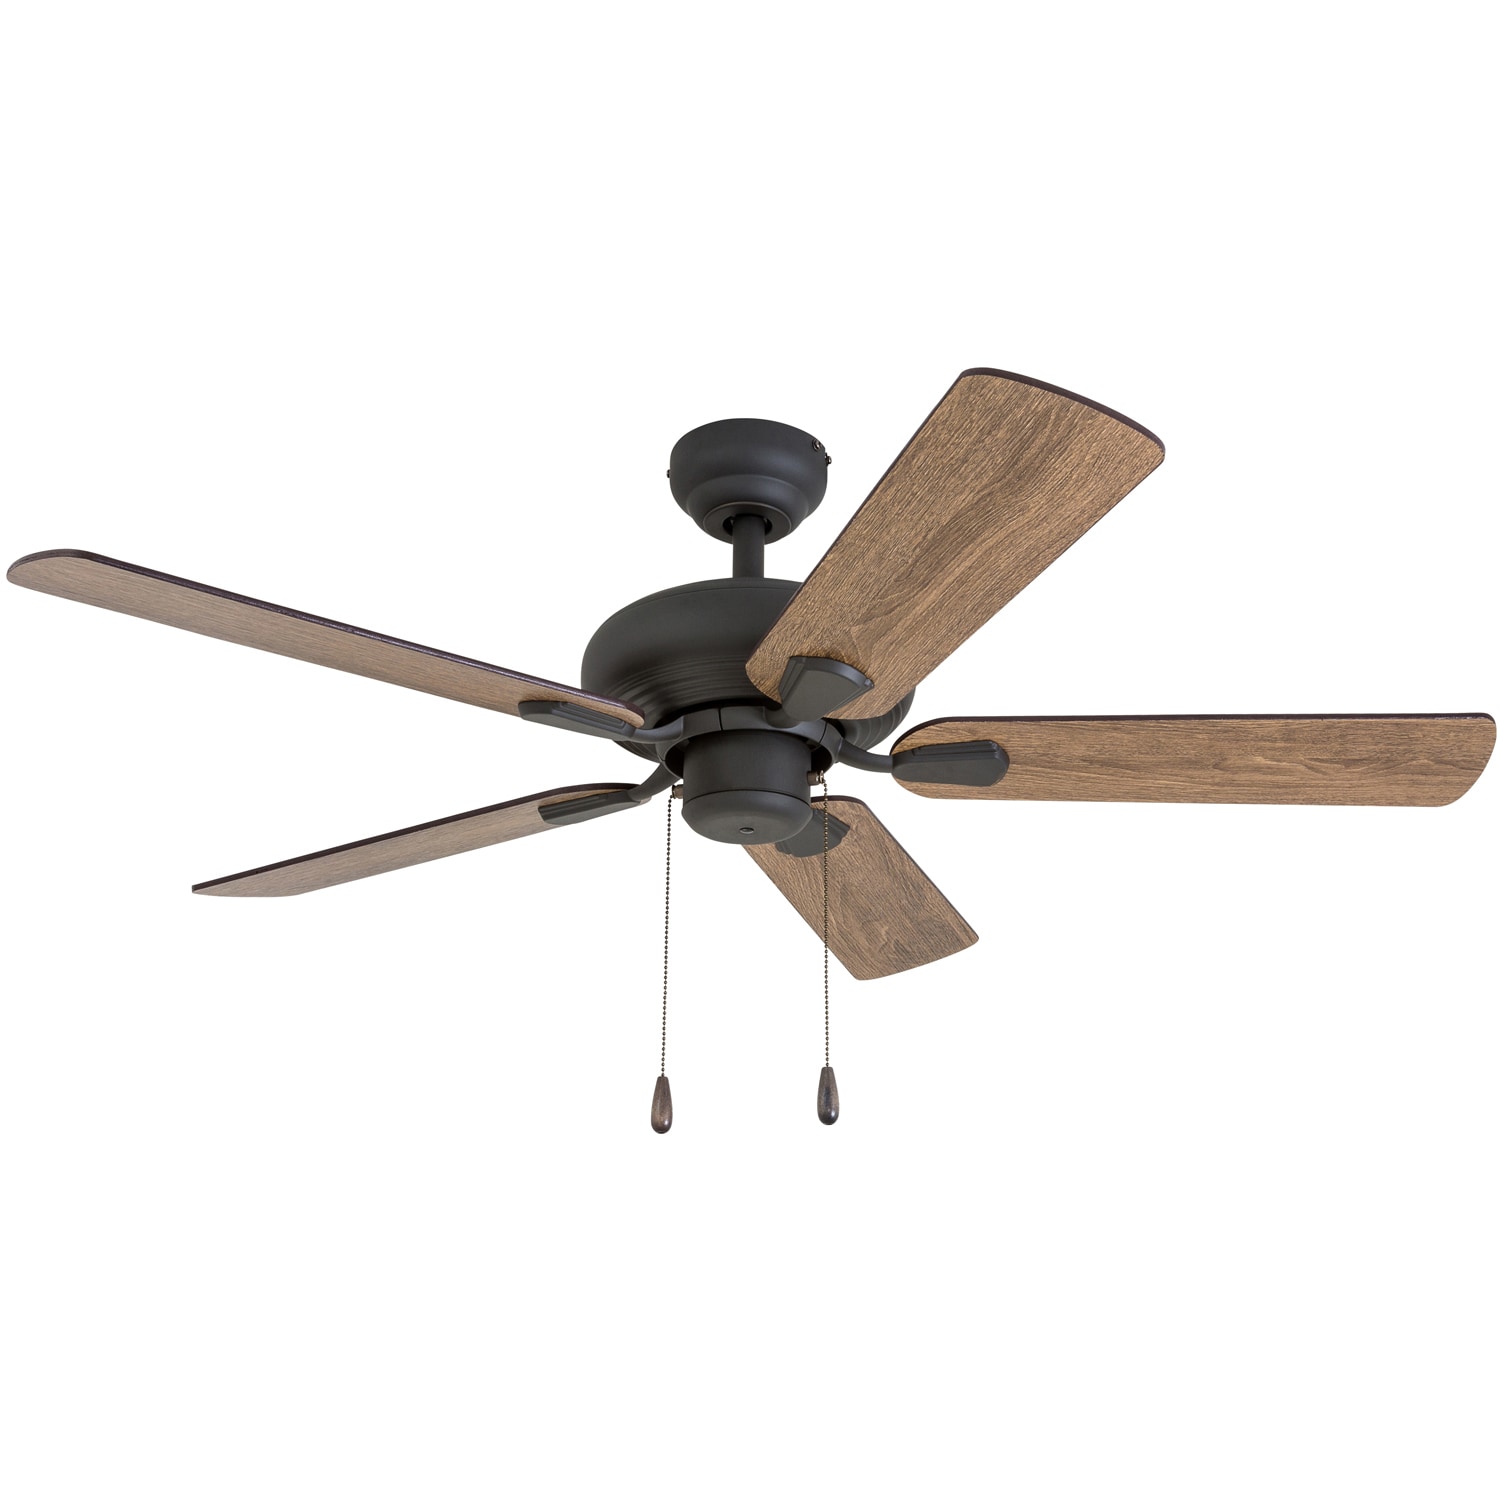 Ceiling fan Classic White / Walnut with Lighting and Pull Chains, Home &  Commercial Heaters, Ventilation & Ceiling Fans